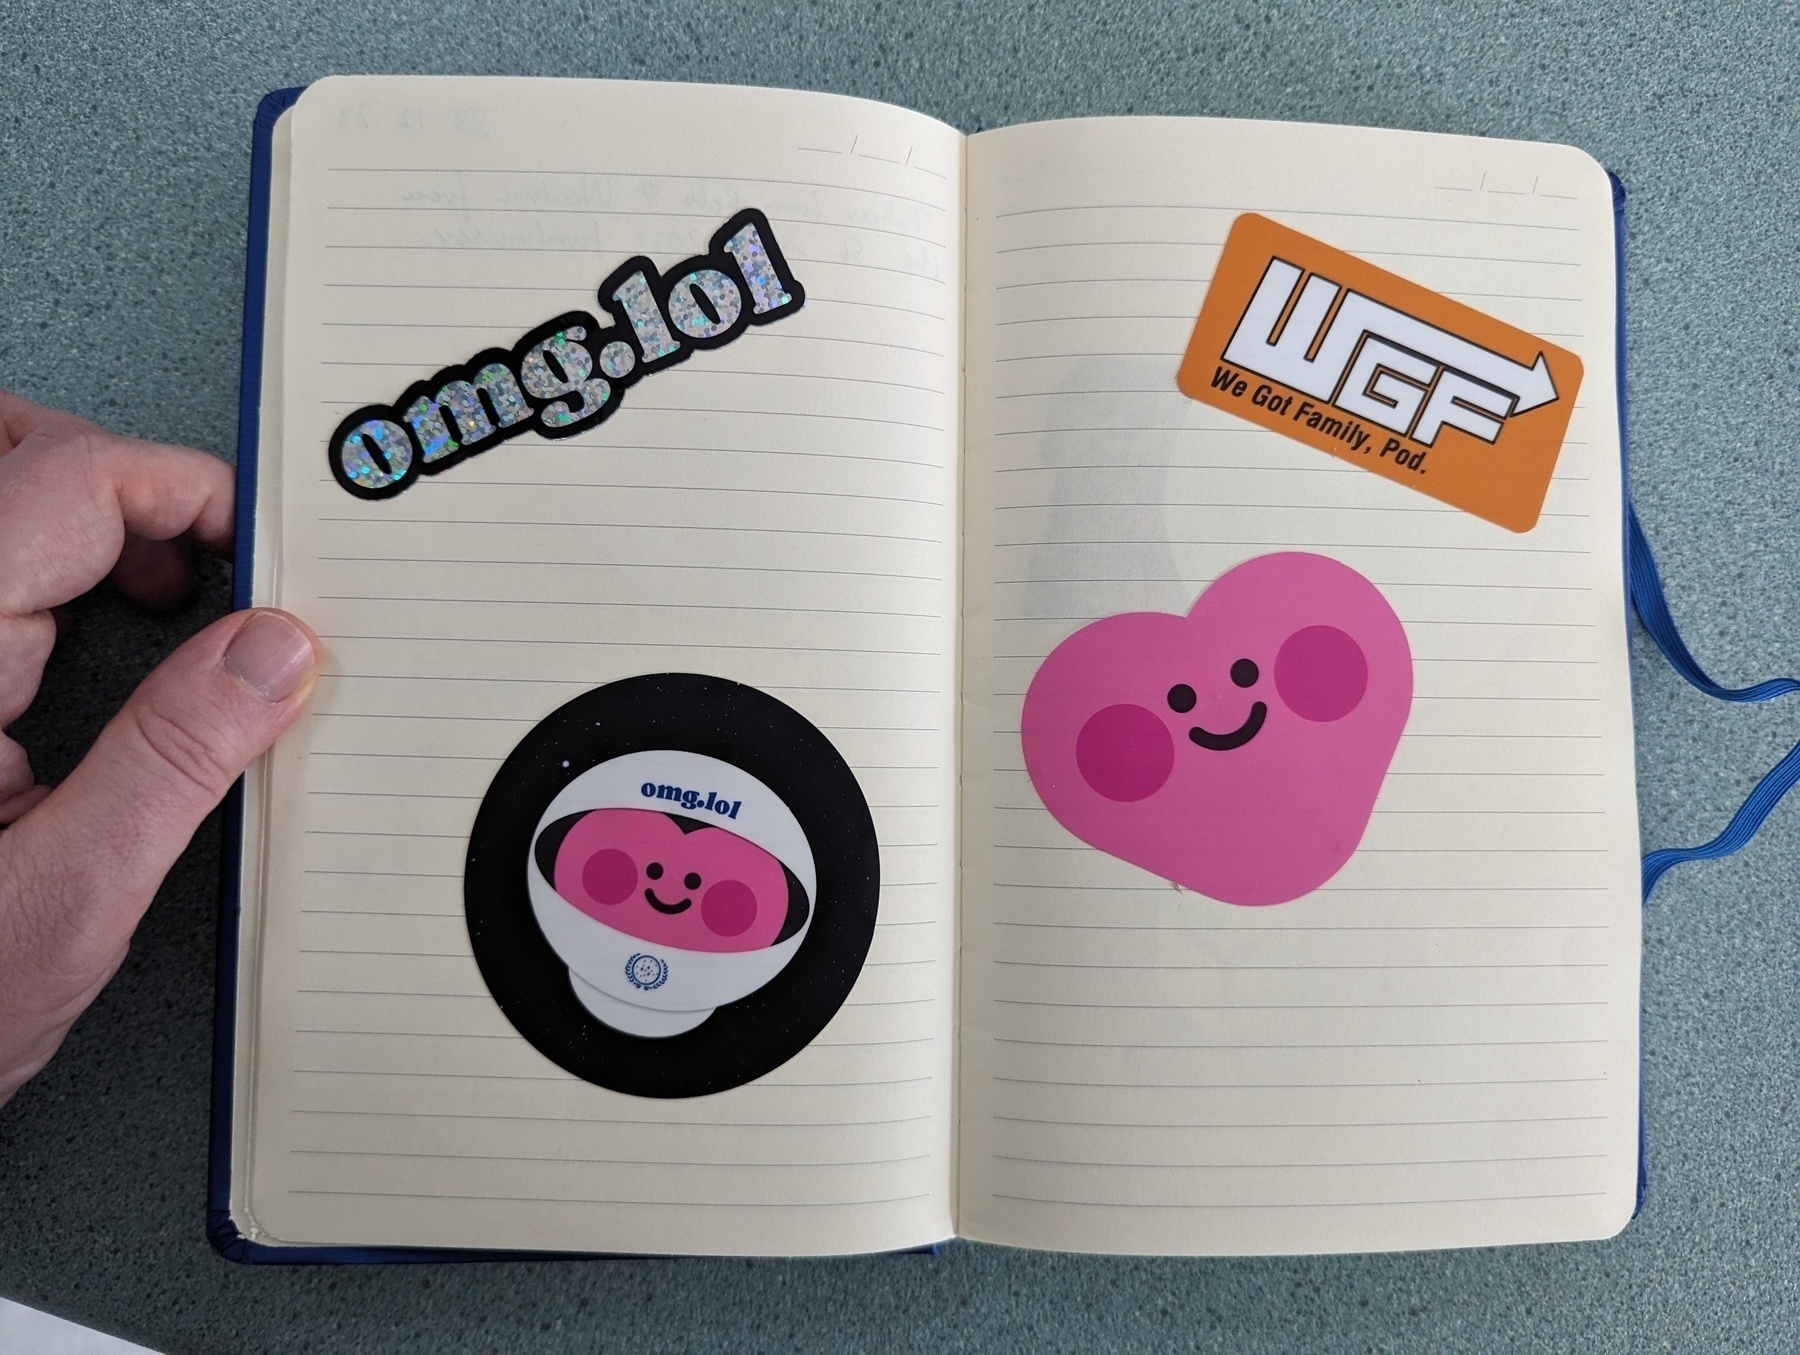 Journal opened up to a double page showing stickers from omg.lol and Robb Knight